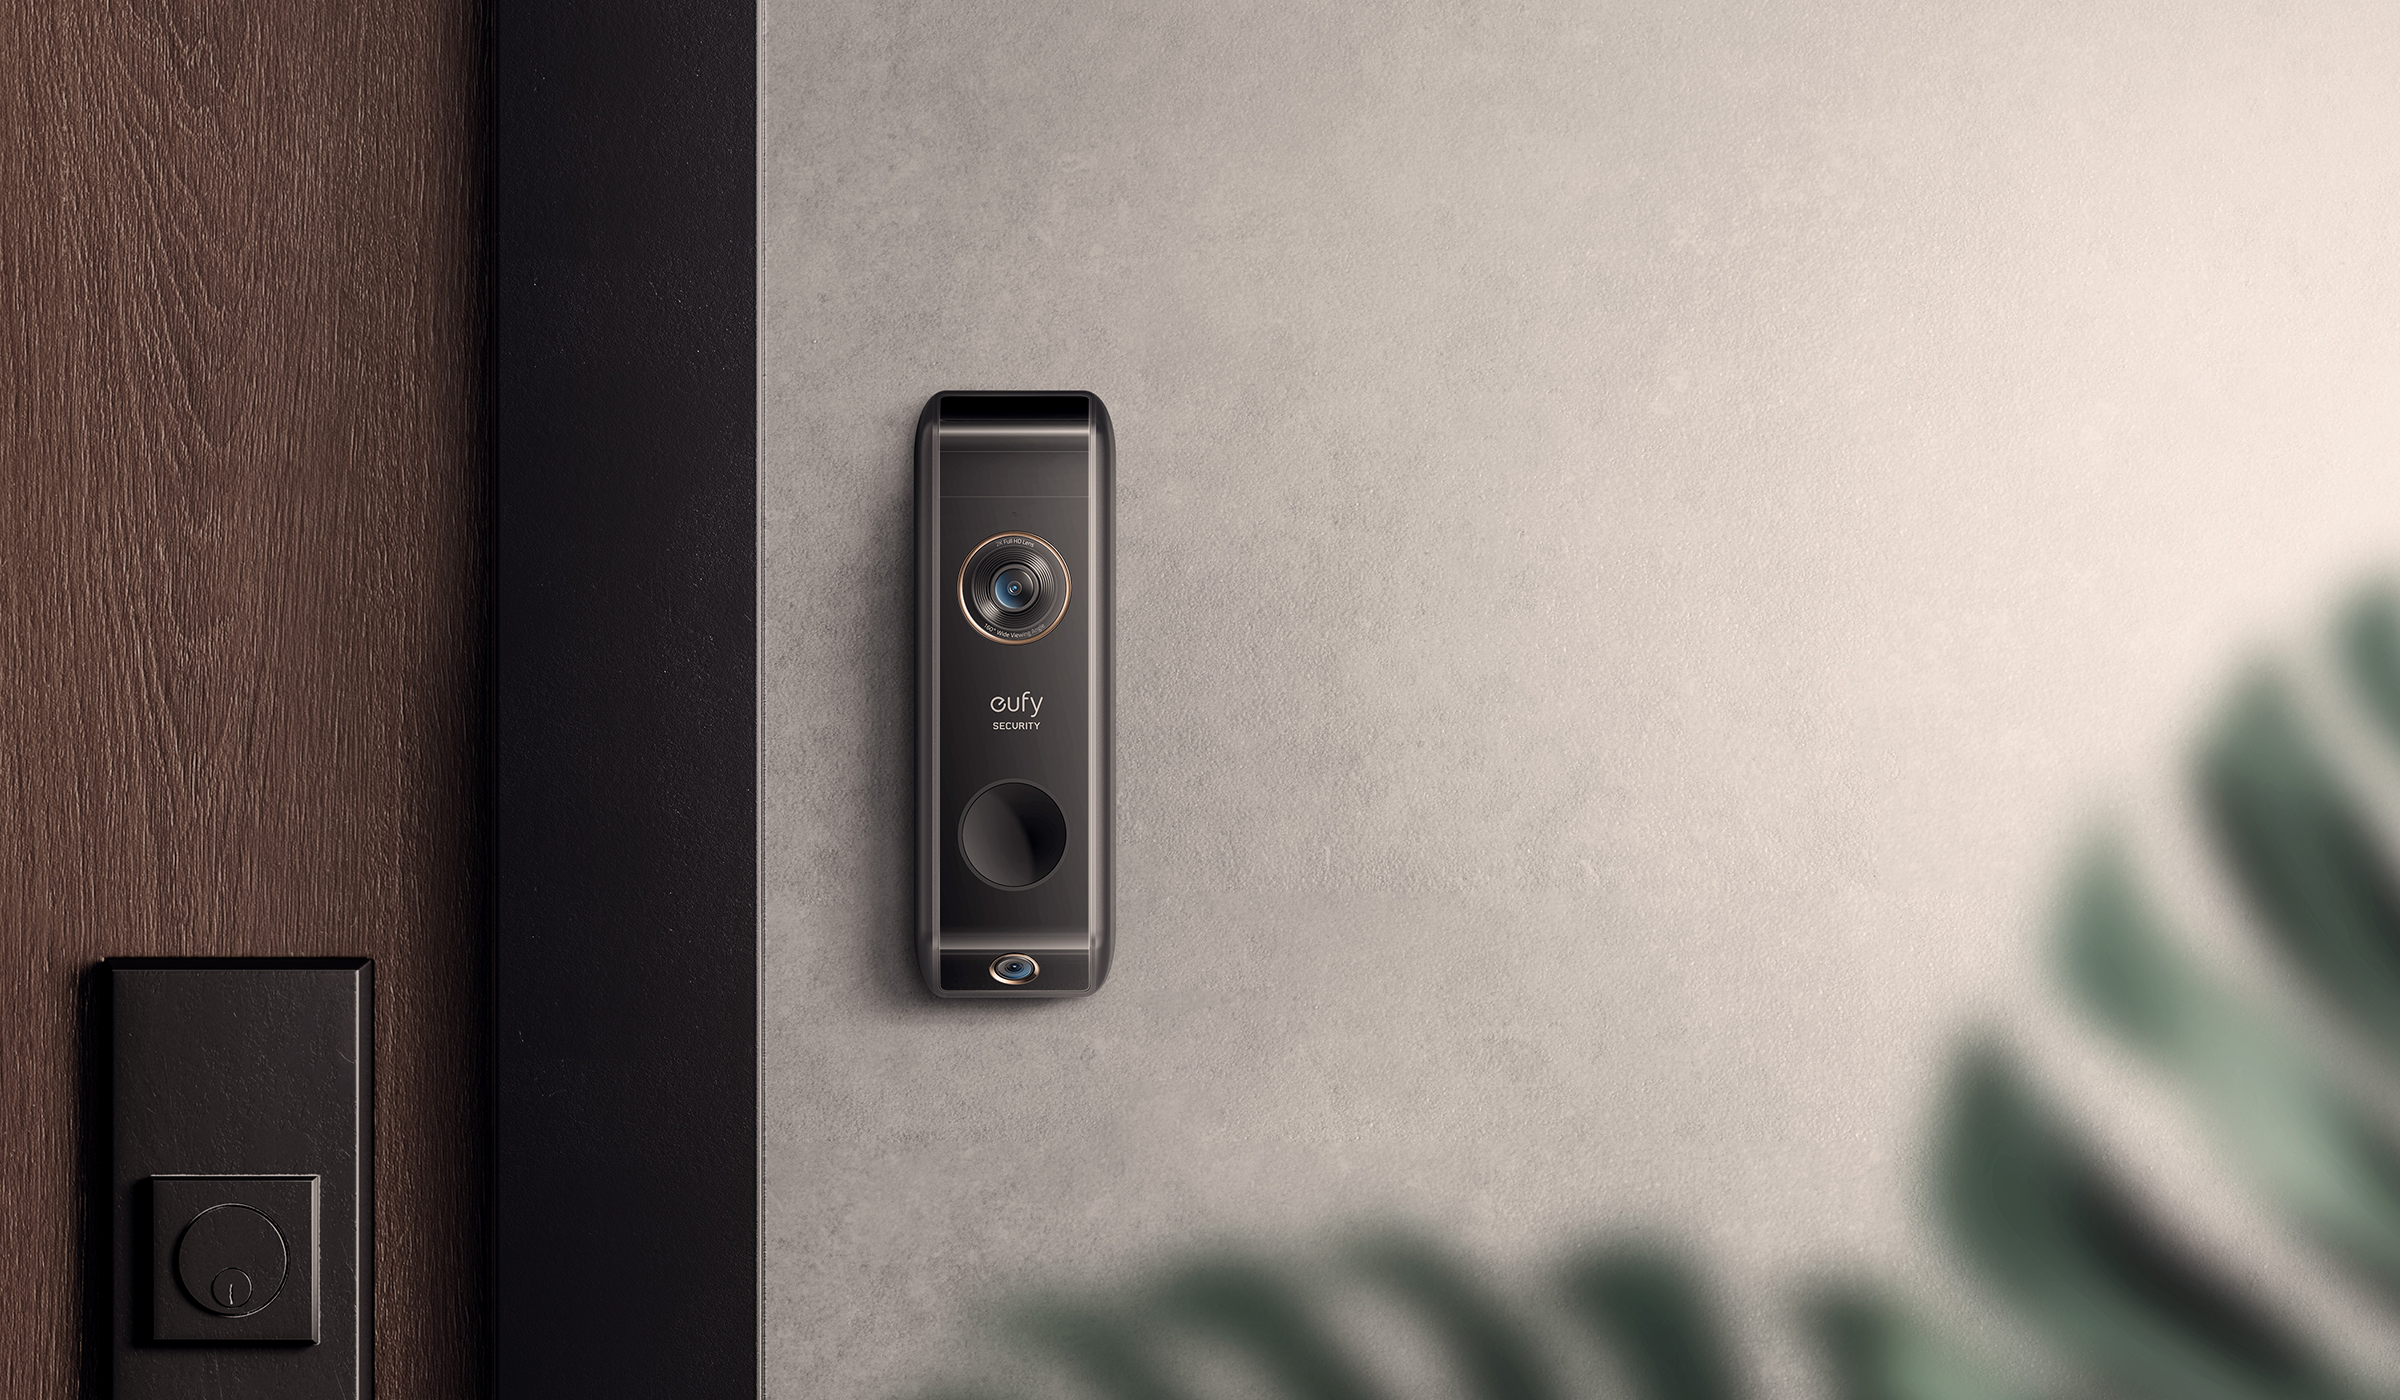 66 01 Eufy &Lt;H1 Class=&Quot;Product_Name&Quot;&Gt;Video Doorbell Dual(2K, Battery-Powered)&Lt;/H1&Gt; Https://Www.youtube.com/Watch?V=Piu4Munkd6U &Lt;Div Class=&Quot;Item&Quot;&Gt; &Lt;P Class=&Quot;Col&Quot;&Gt;&Lt;Strong&Gt;Dual Camera&Lt;/Strong&Gt; : &Lt;Span Class=&Quot;Value&Quot;&Gt;Front Camera 160°, Package Camera 97°&Lt;/Span&Gt;&Lt;/P&Gt; &Lt;/Div&Gt; &Lt;Div Class=&Quot;Item&Quot;&Gt; &Lt;P Class=&Quot;Col&Quot; Style=&Quot;Text-Align: Left;&Quot;&Gt;&Lt;Strong&Gt;Video Quality&Lt;/Strong&Gt; : &Lt;Span Class=&Quot;Value&Quot;&Gt;Front Camera 2K (2560 ×1920), Package Camera 1080P (1600 × ️1200)&Lt;/Span&Gt;&Lt;/P&Gt; &Lt;/Div&Gt; &Lt;Div Class=&Quot;Item&Quot; Style=&Quot;Text-Align: Left;&Quot;&Gt; &Lt;P Class=&Quot;Col&Quot;&Gt;&Lt;Strong&Gt;Smart Ai Support&Lt;/Strong&Gt;: &Lt;Span Class=&Quot;Value&Quot;&Gt;Package Detection, Waiting Detection, Human Detection&Lt;/Span&Gt;&Lt;/P&Gt; &Lt;/Div&Gt; &Lt;Div Class=&Quot;Item&Quot; Style=&Quot;Text-Align: Left;&Quot;&Gt; &Lt;P Class=&Quot;Col&Quot;&Gt;&Lt;Strong&Gt;Motion Detection&Lt;/Strong&Gt;: &Lt;Span Class=&Quot;Value&Quot;&Gt;Radar Detection, Pir Detection&Lt;/Span&Gt;&Lt;/P&Gt; &Lt;/Div&Gt; &Lt;Div Class=&Quot;Item&Quot;&Gt; &Lt;P Class=&Quot;Col&Quot; Style=&Quot;Text-Align: Left;&Quot;&Gt;&Lt;Strong&Gt;Video Storage&Lt;/Strong&Gt;: Motion-Activated Event Recording. Homebase 2 Contains 16Gb Of Local Storage (Lasts Up To 90 Days). &Lt;Span Class=&Quot;Value&Quot;&Gt;The Recording Duration Estimation Model Is 25 Recordings Per Day; Each Recording Lasts 15 Seconds.&Lt;/Span&Gt;&Lt;/P&Gt; &Lt;Ul&Gt; &Lt;Li&Gt;1 Charge Last 6 Months&Lt;/Li&Gt; &Lt;Li&Gt;Family Recognition&Lt;/Li&Gt; &Lt;Li&Gt;Works With Voice Assistant&Lt;/Li&Gt; &Lt;/Ul&Gt; &Lt;Pre&Gt;One Year Eufy Warranty&Lt;/Pre&Gt; &Nbsp; &Lt;/Div&Gt; Video Doorbell Eufy Video Doorbell Dual (2K, Battery-Powered) E8213G11